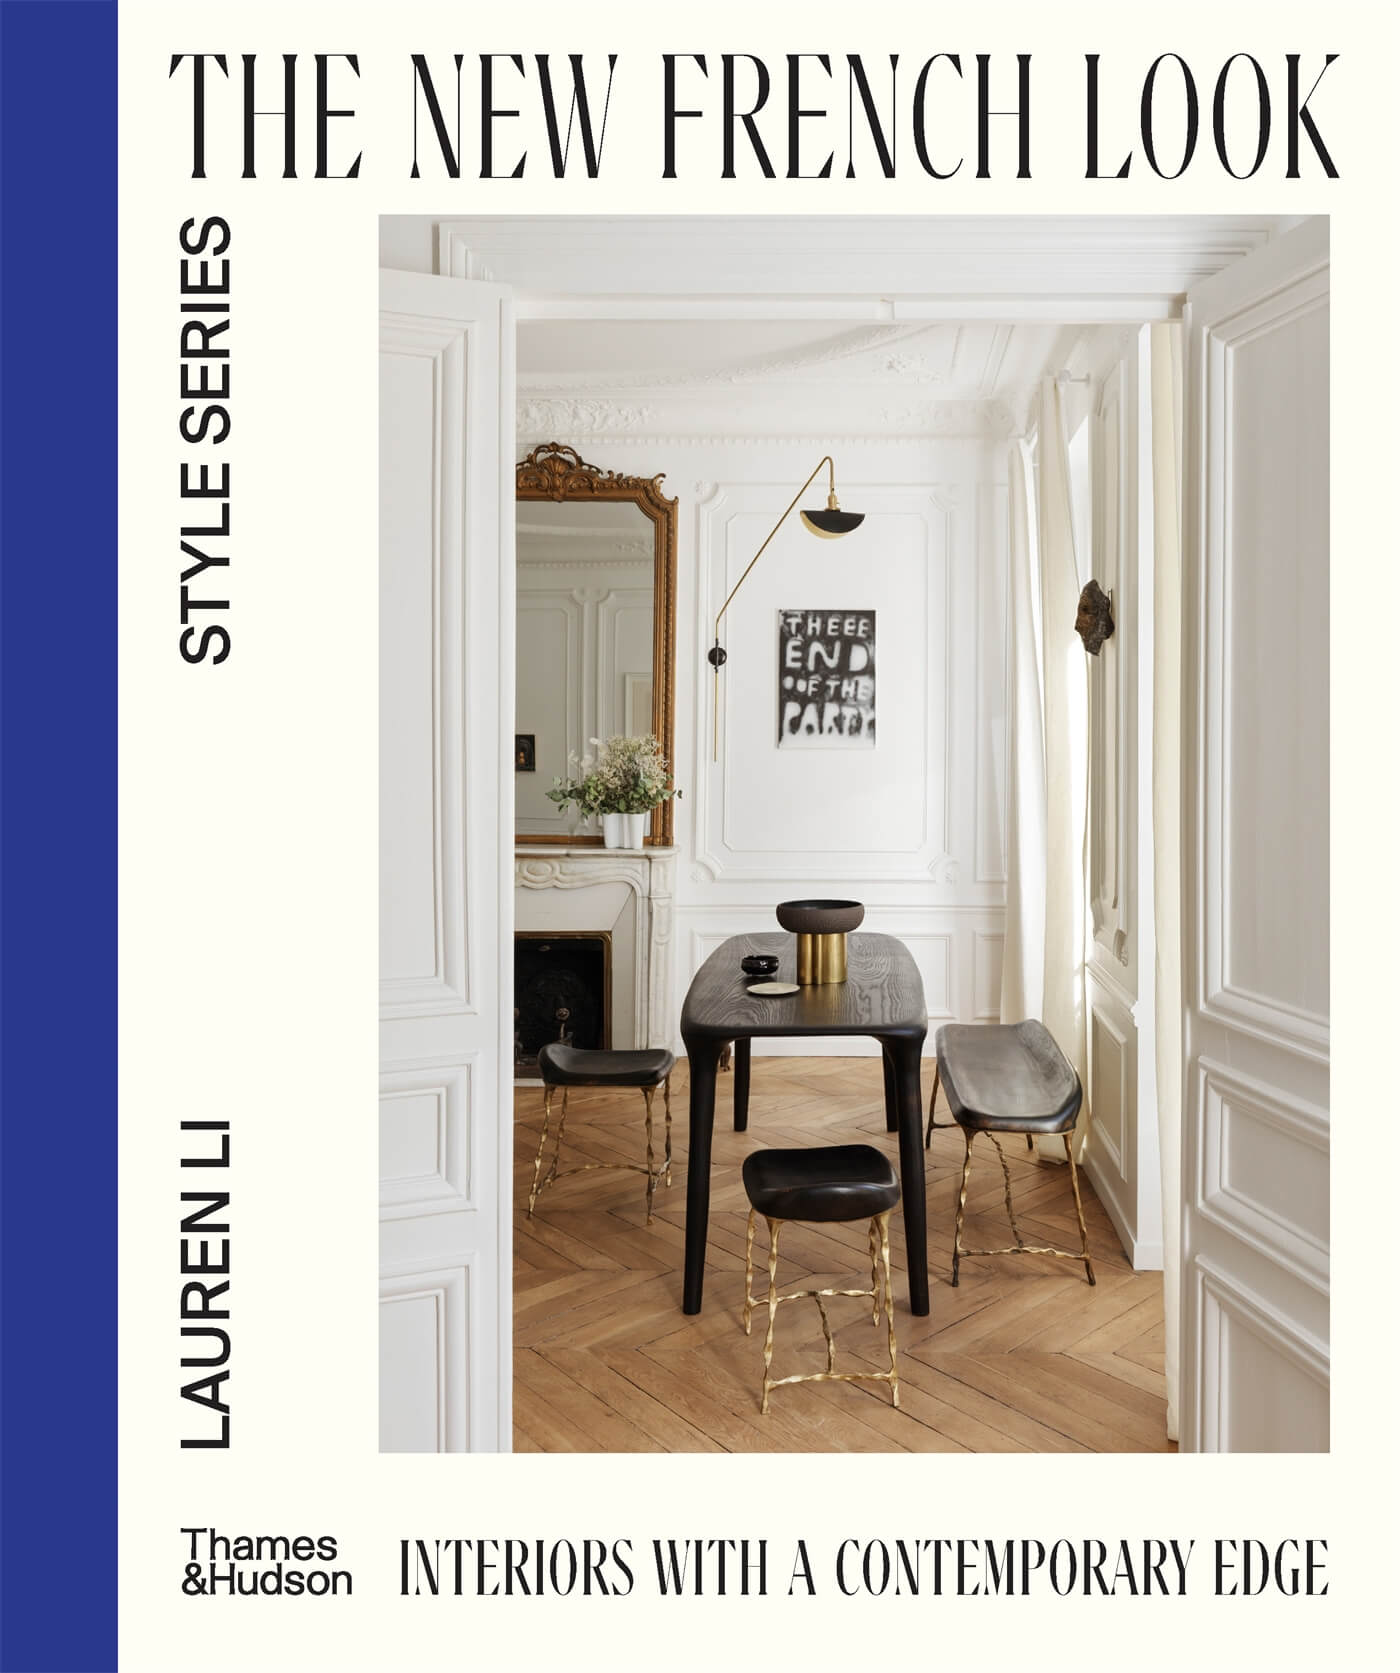 Book cover featuring dream background with royal blue spine/ strip down left side. Photo of chic French style interior centre right, serif font featuring title across top. Author and series name on left side, vertical. Subtitle and publisher along bottom